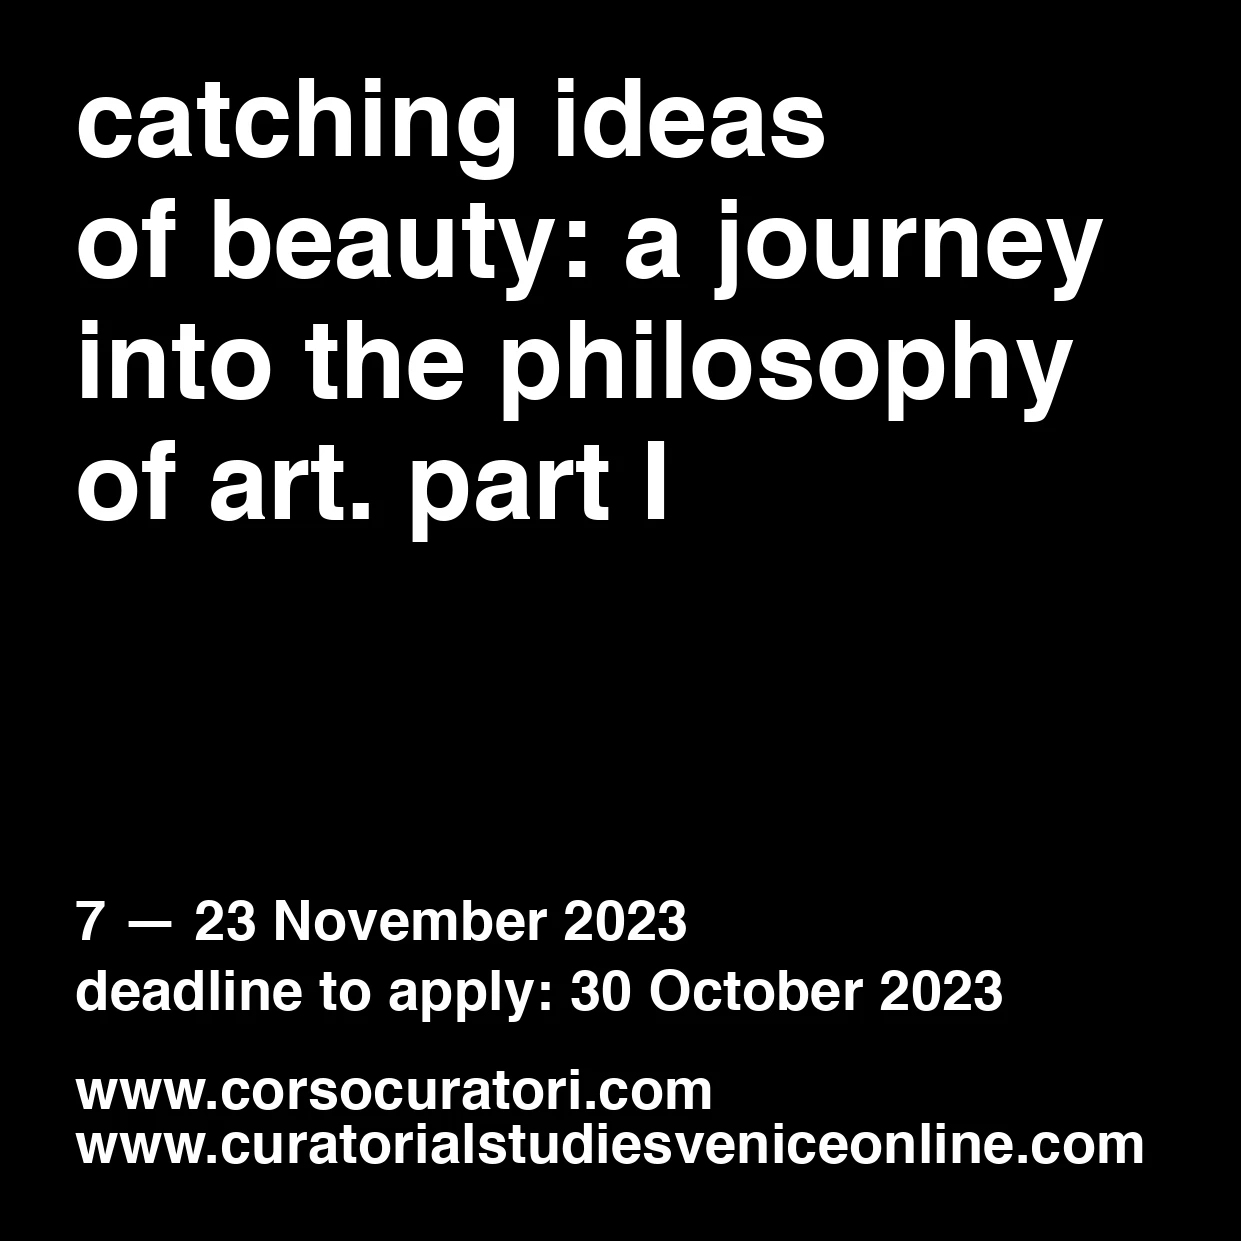 CATCHING IDEAS OF BEAUTY: A JOURNEY INTO THE PHILOSOPHY OF ART PART I